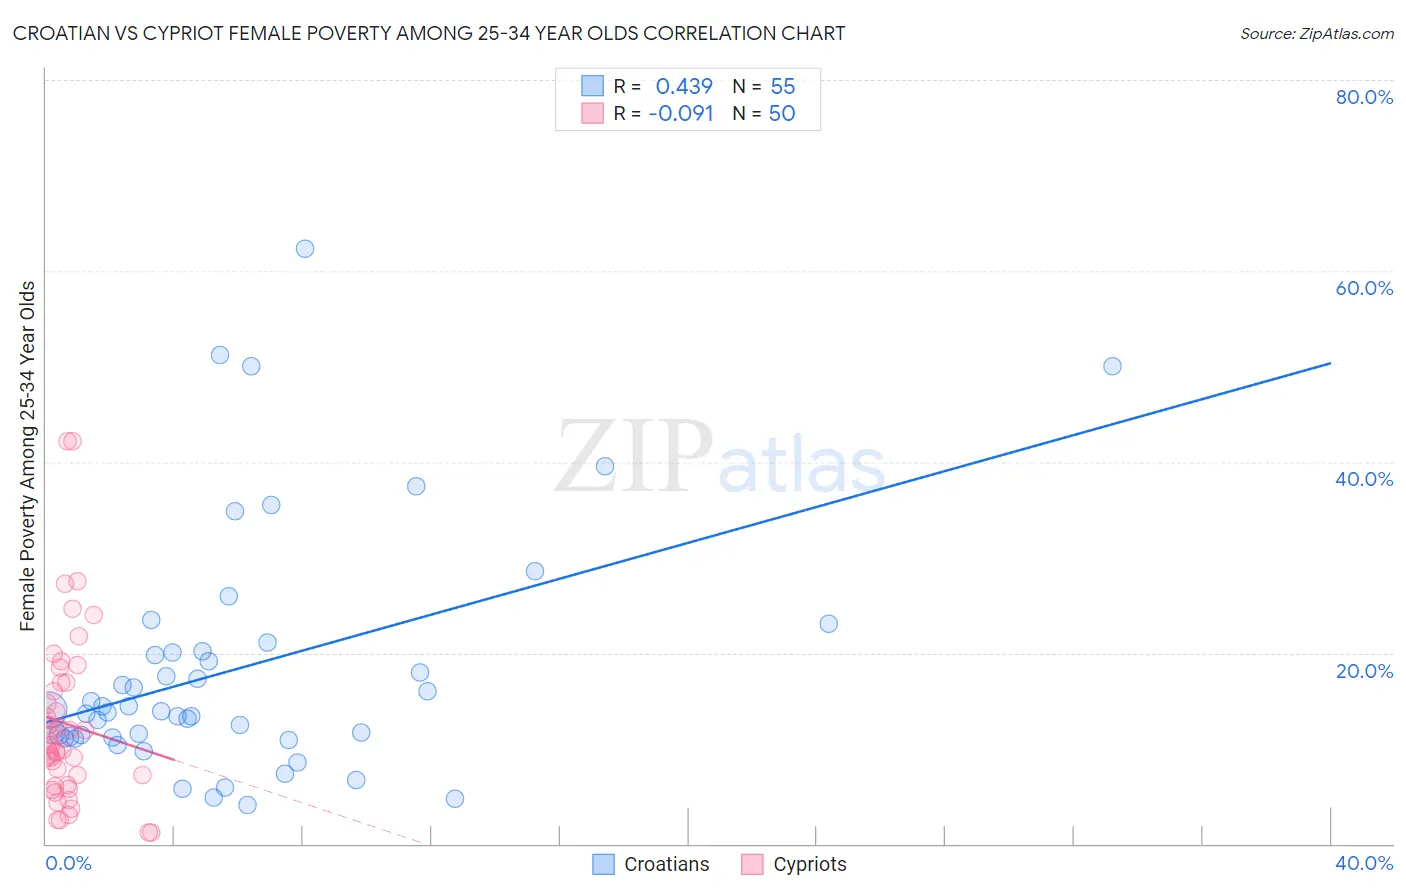 Croatian vs Cypriot Female Poverty Among 25-34 Year Olds